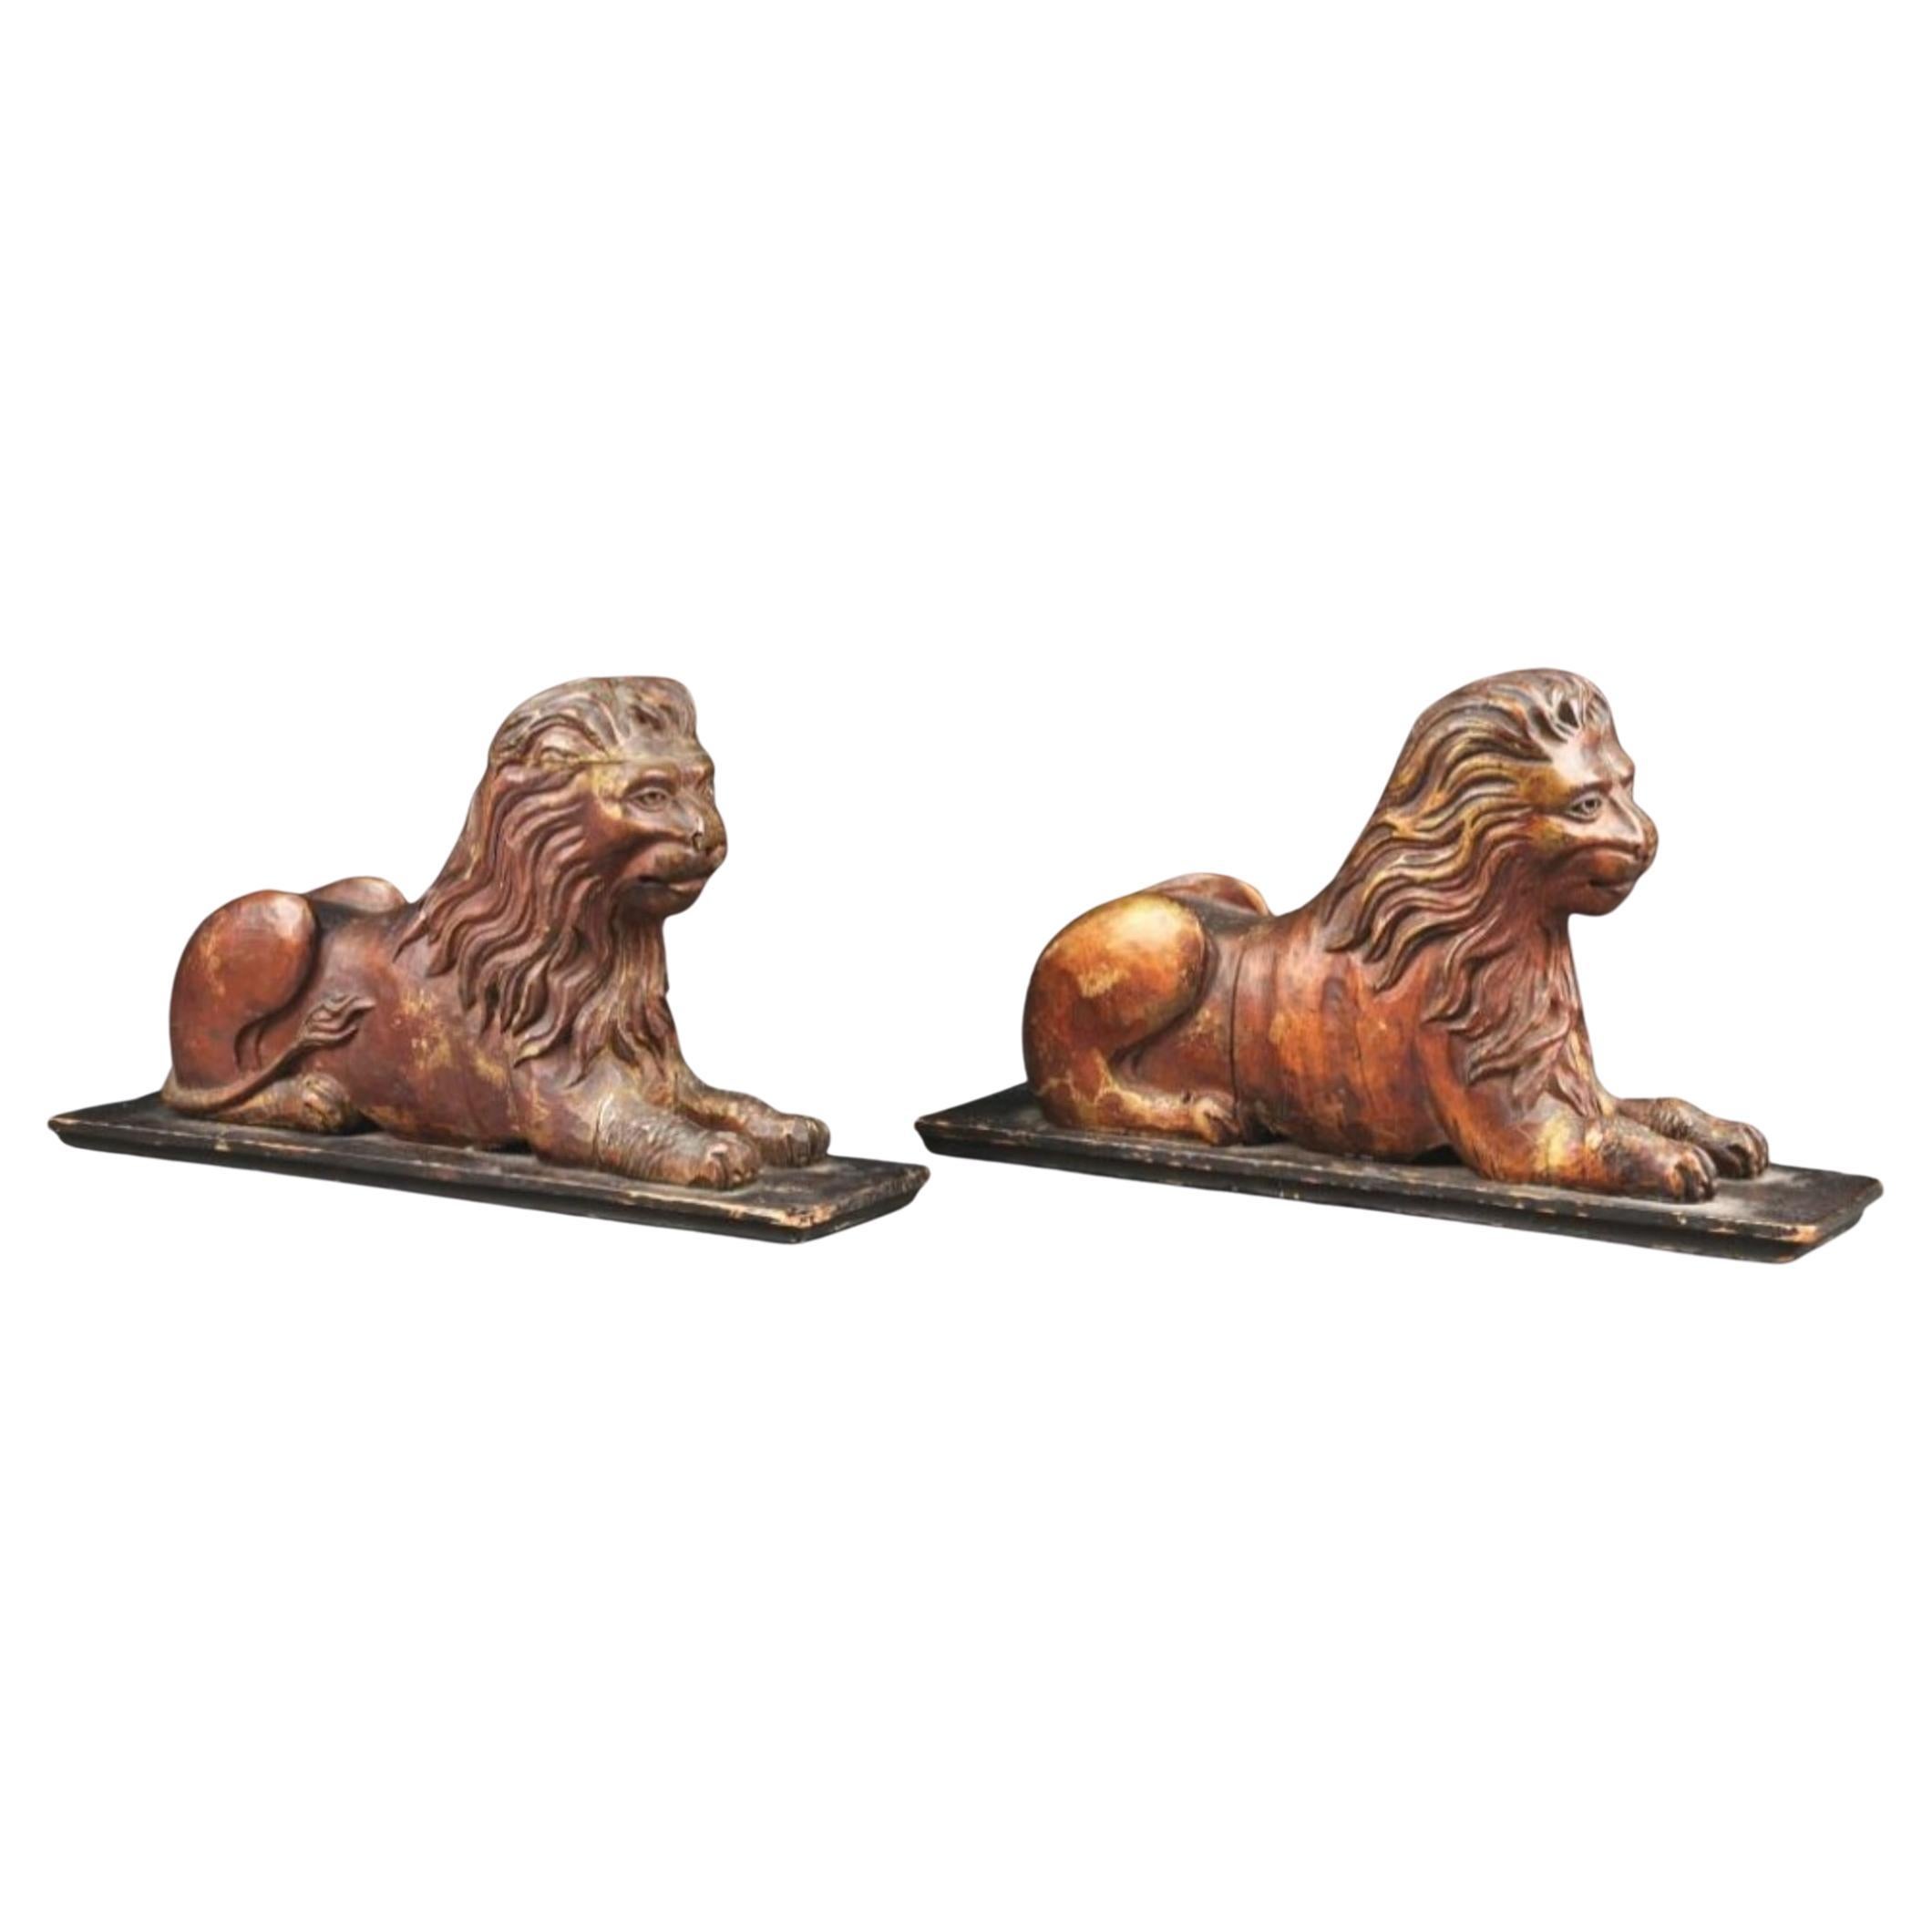 Pair of Late 19th Century Wood and Gilt Lions from Asia